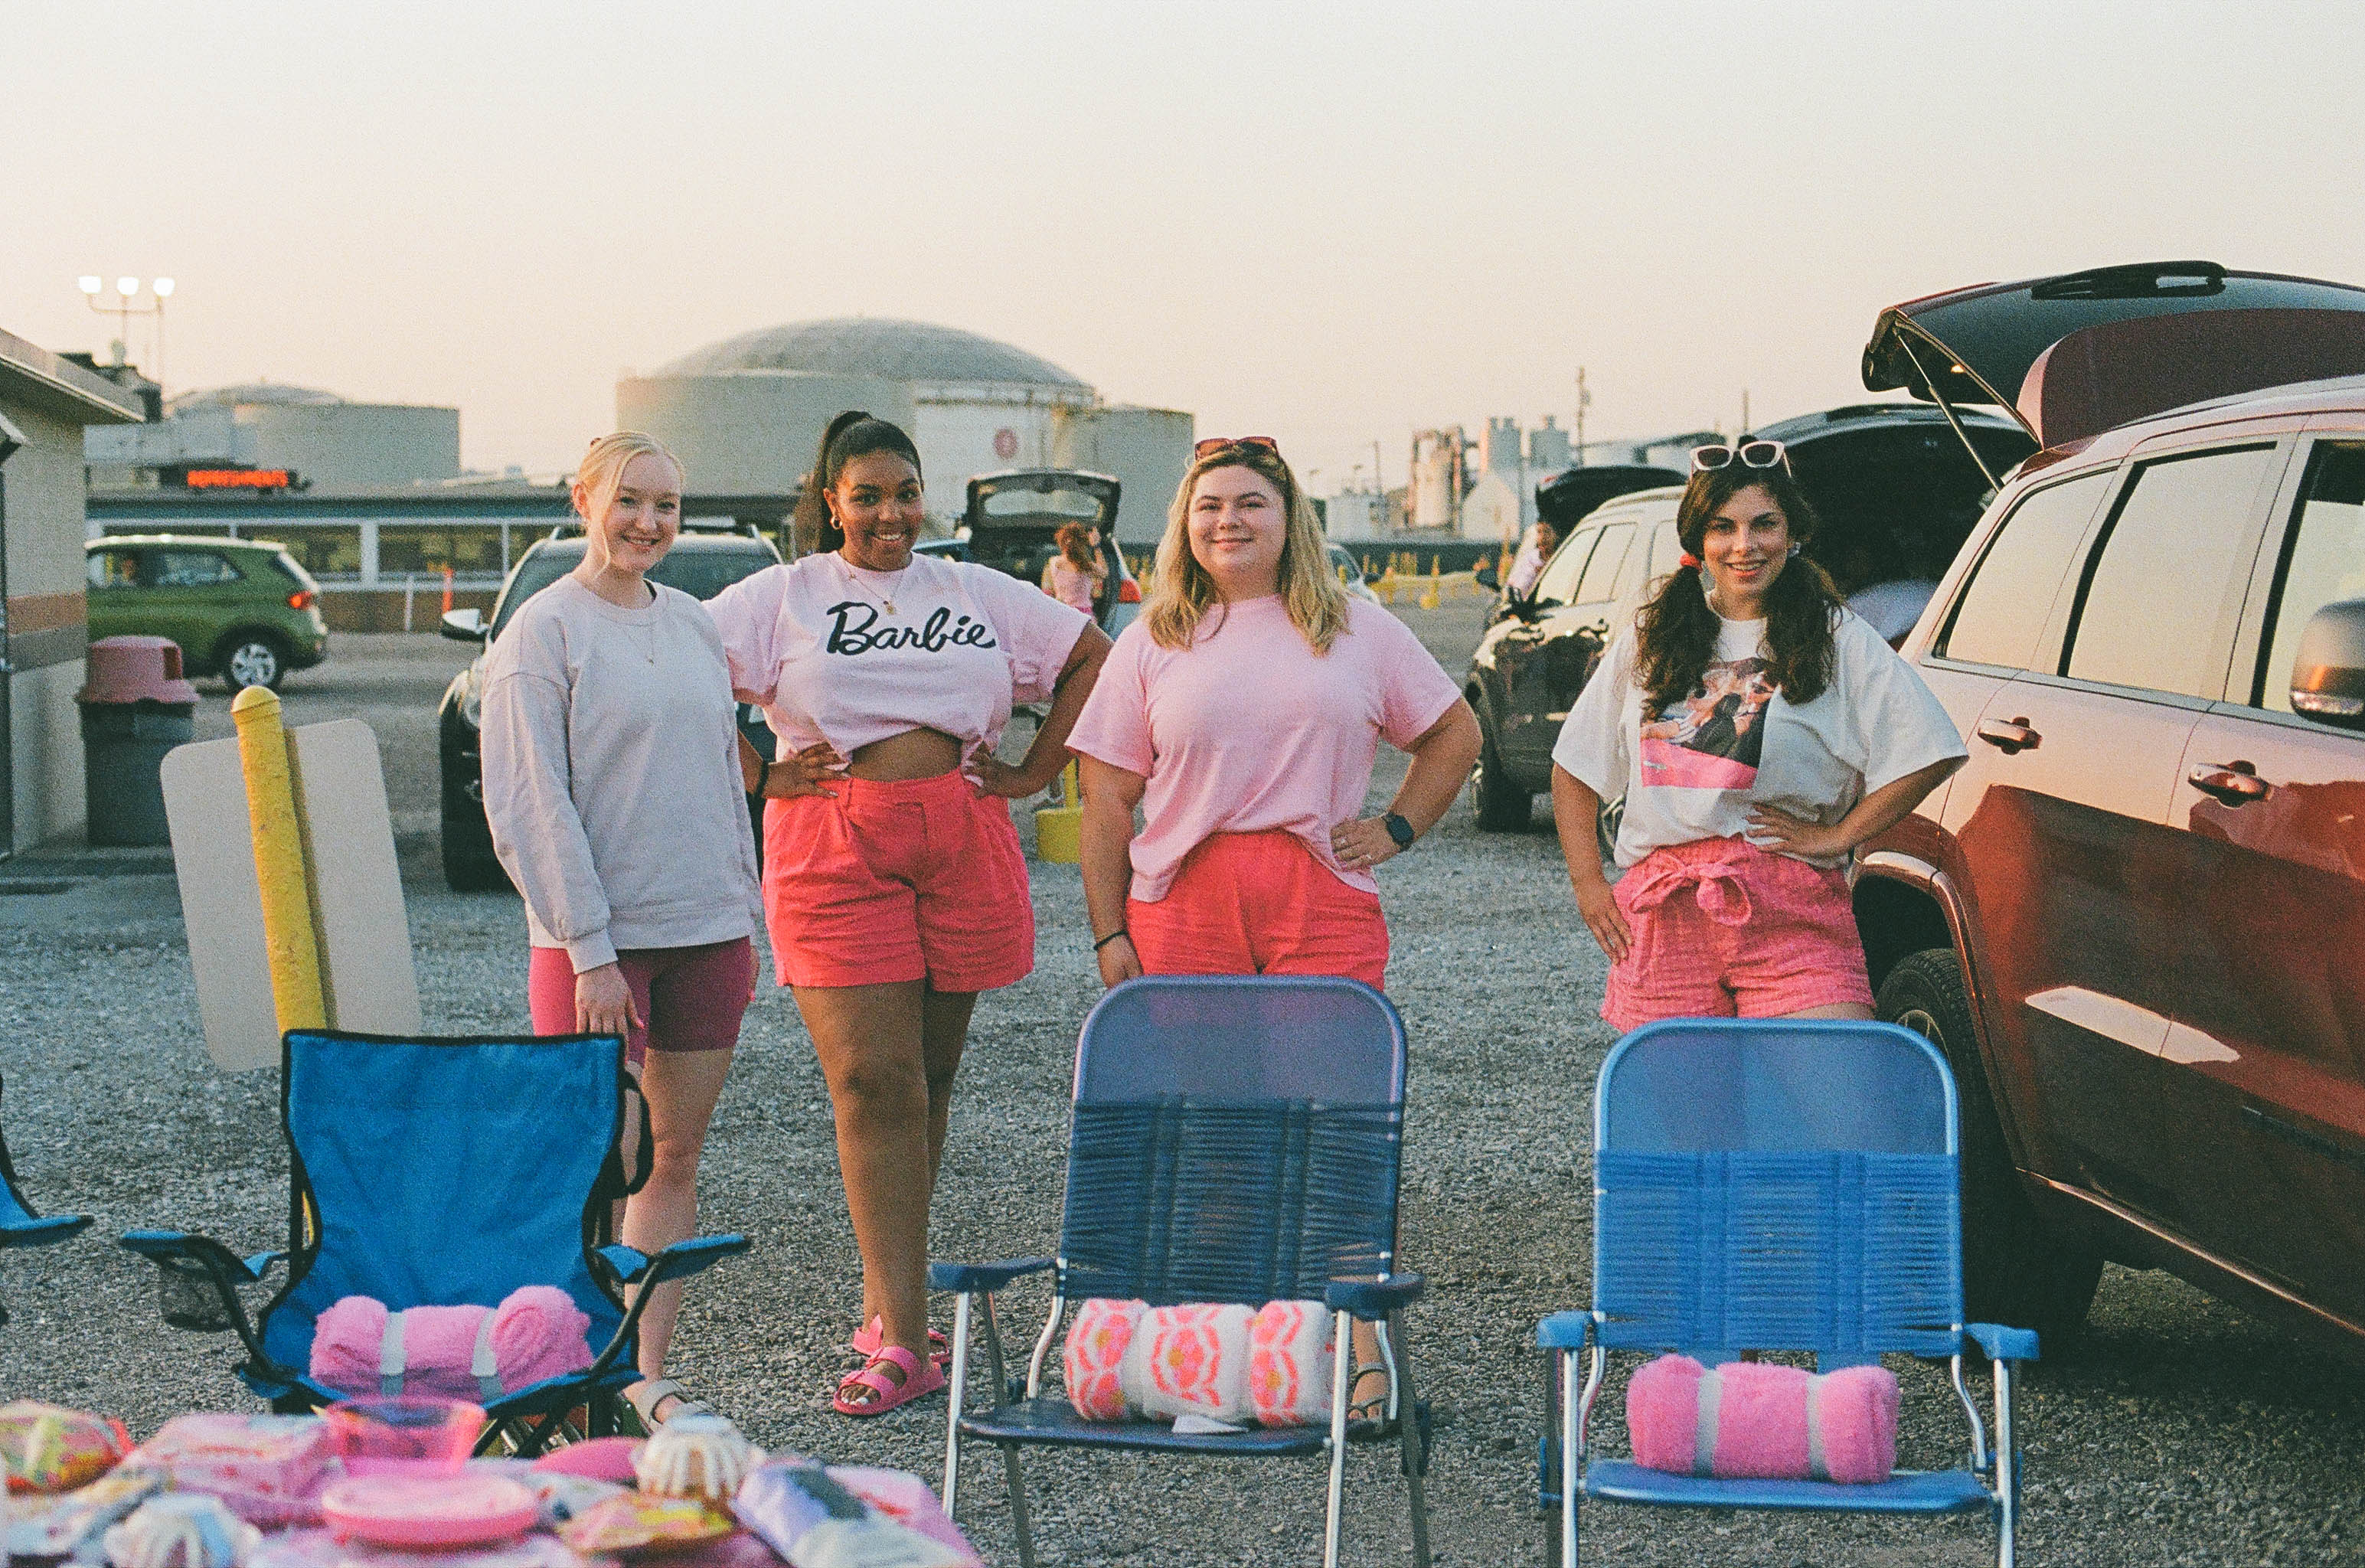 Four women standing behind chairs in a drive-in movie theater parking lot